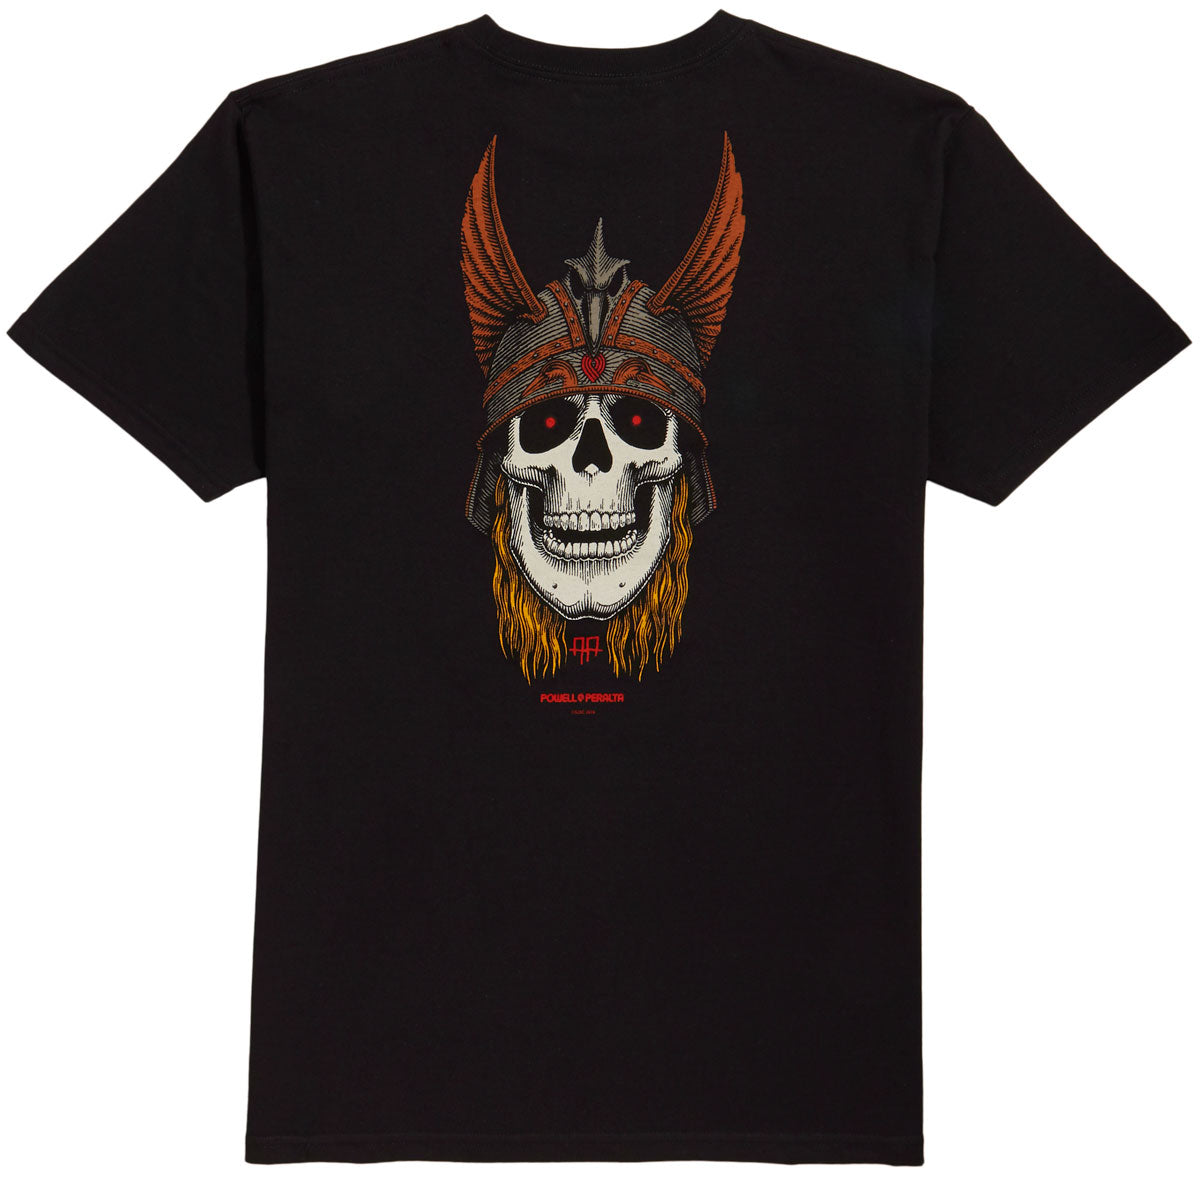 Powell-Peralta Andy Anderson Skull T-Shirt - Black image 2